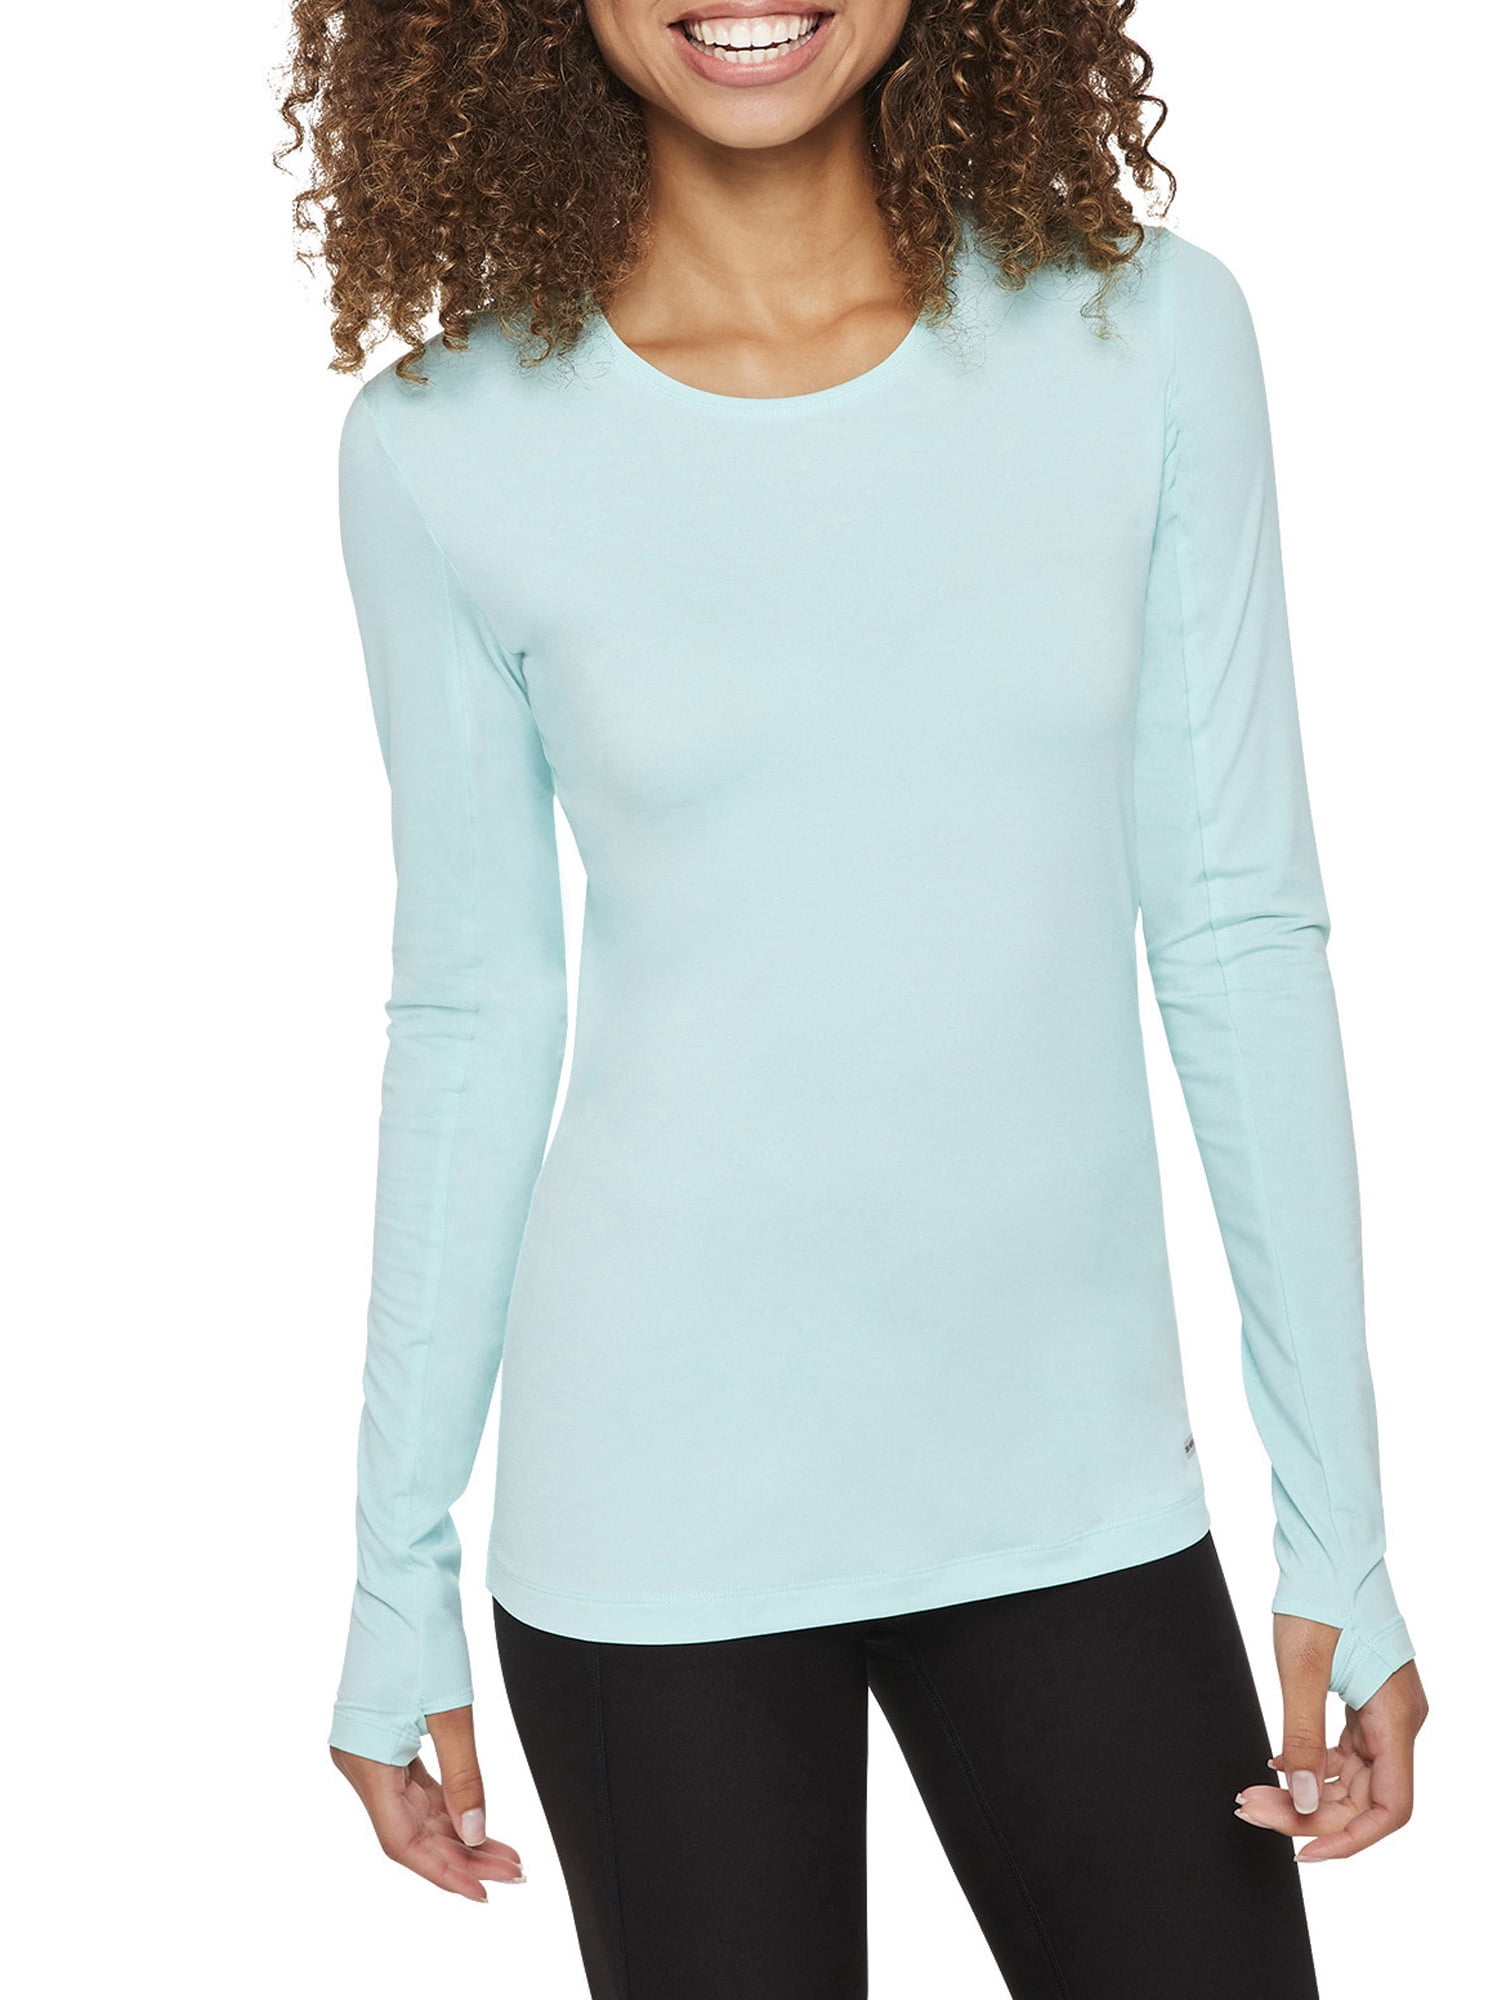 Athletic Works - Athletic Works Women's Active Long Sleeve Tee ...